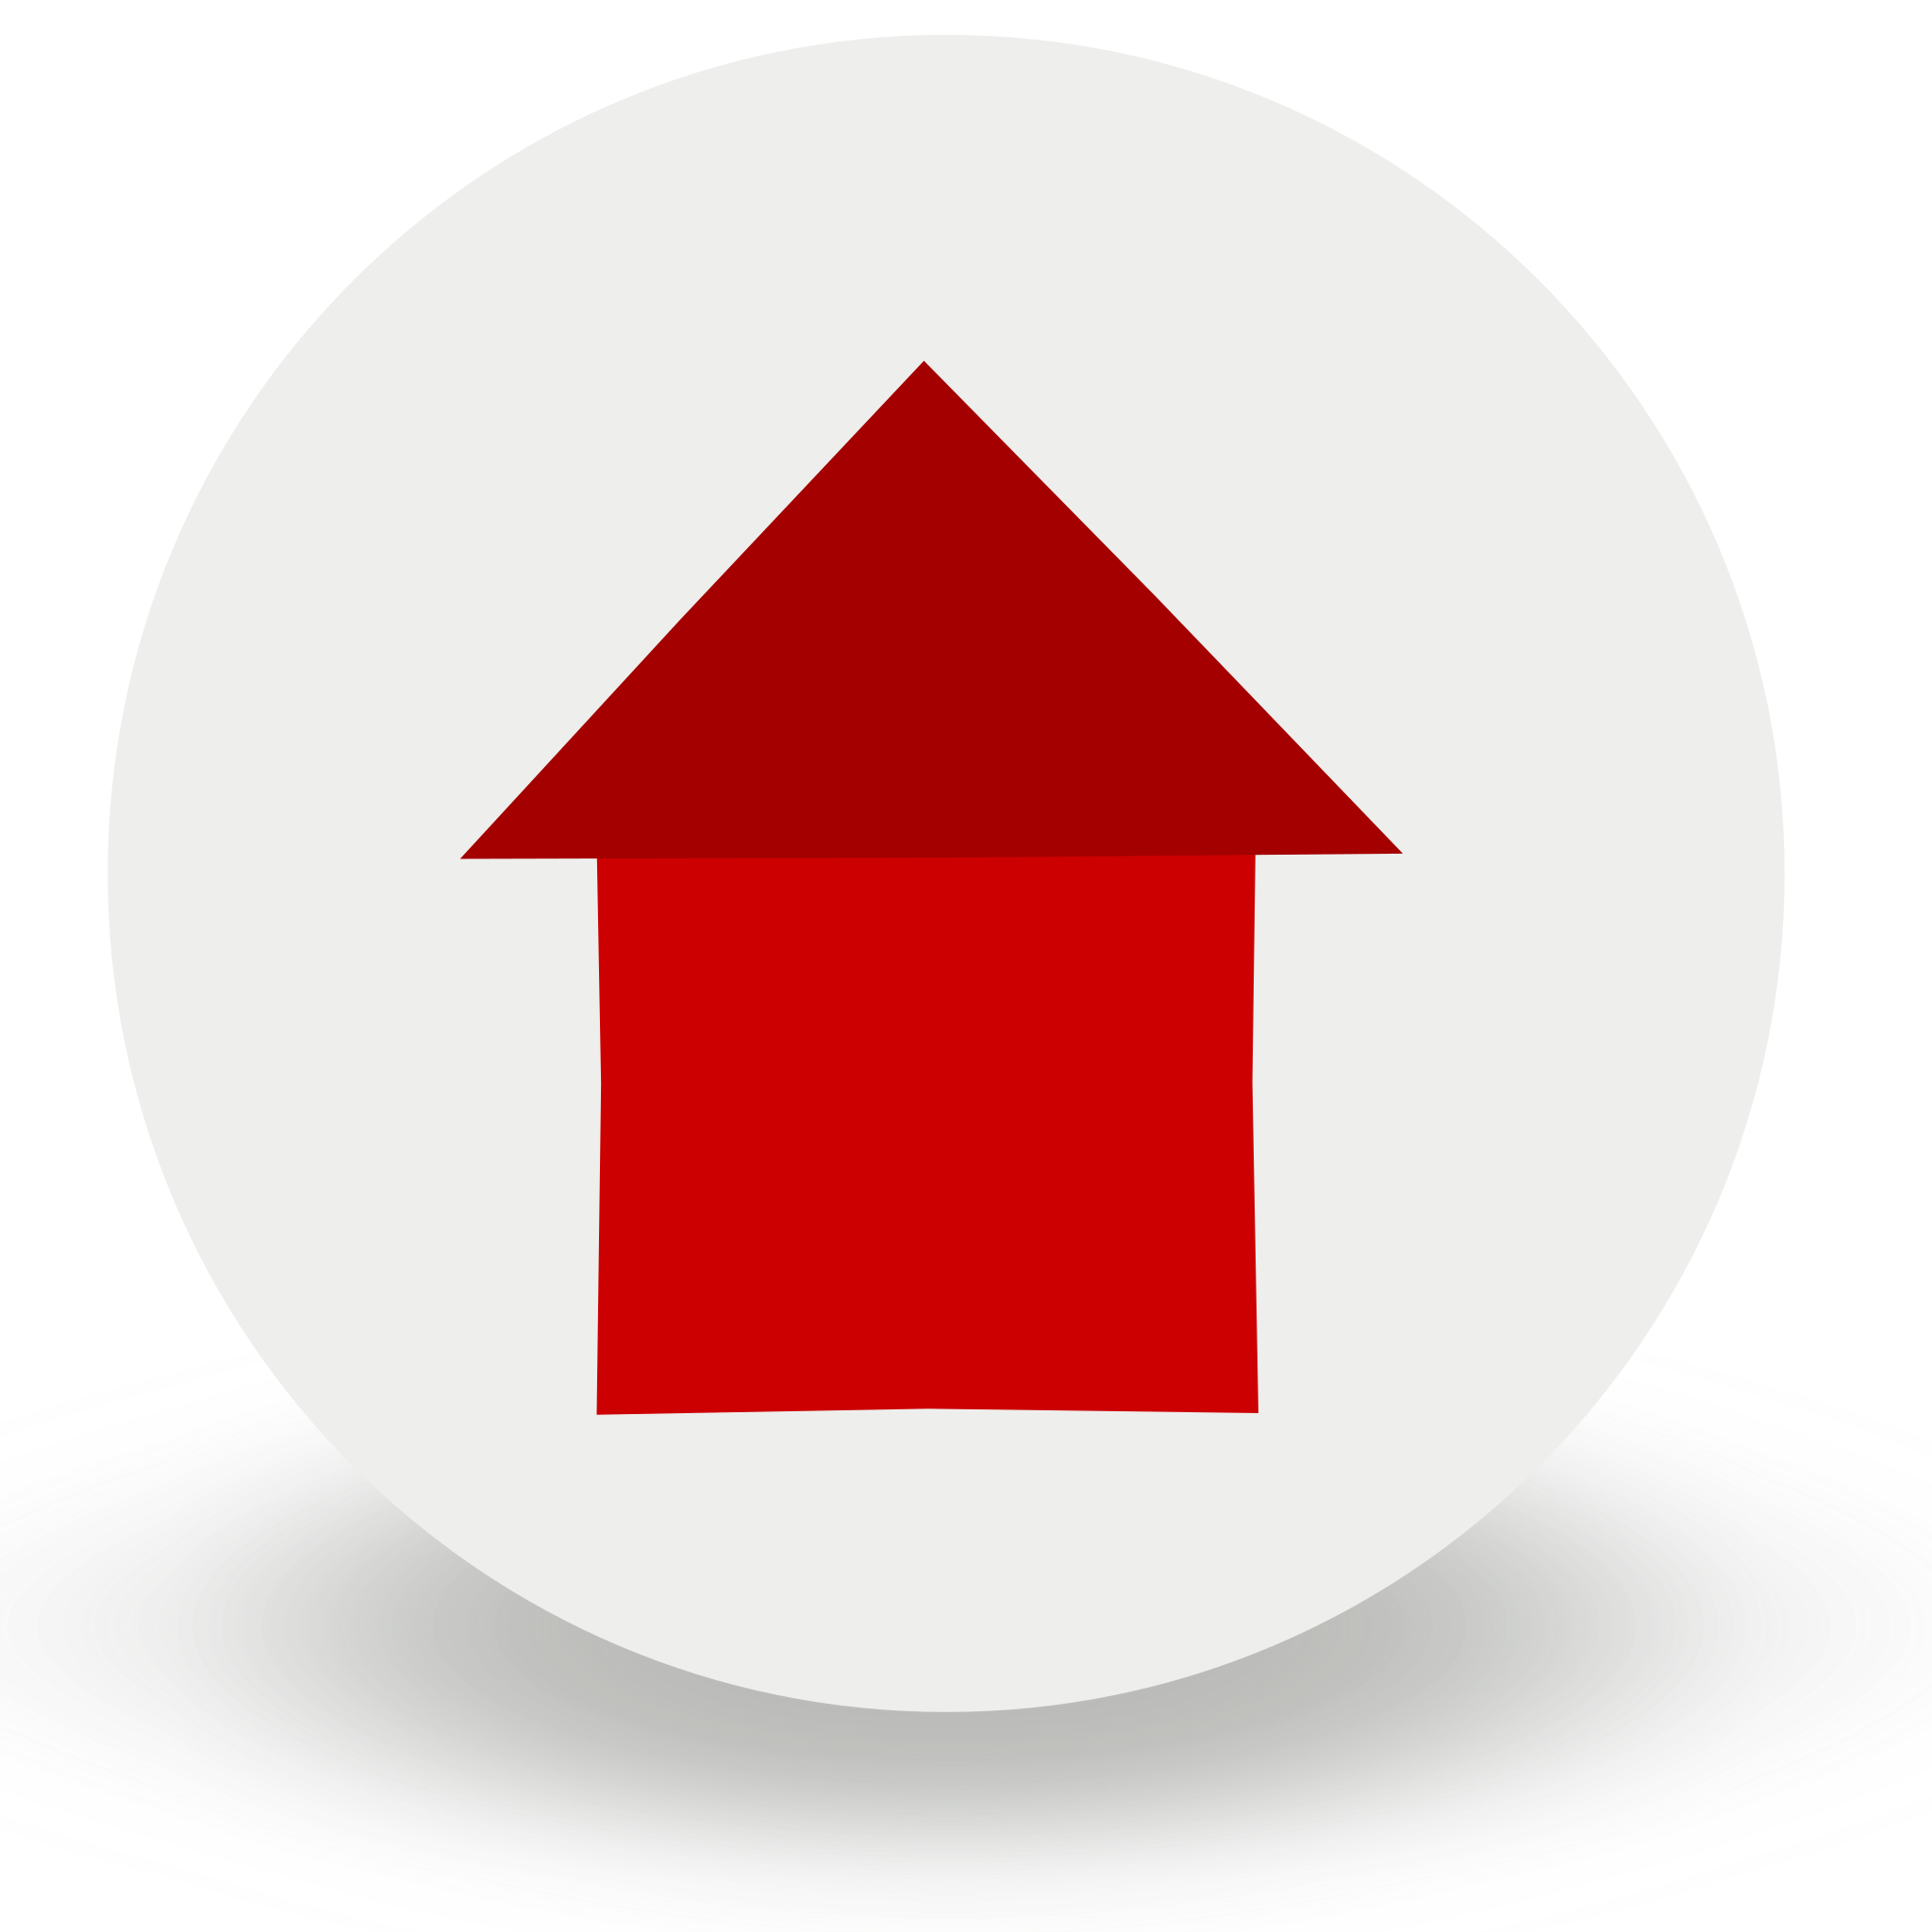 red home icon png